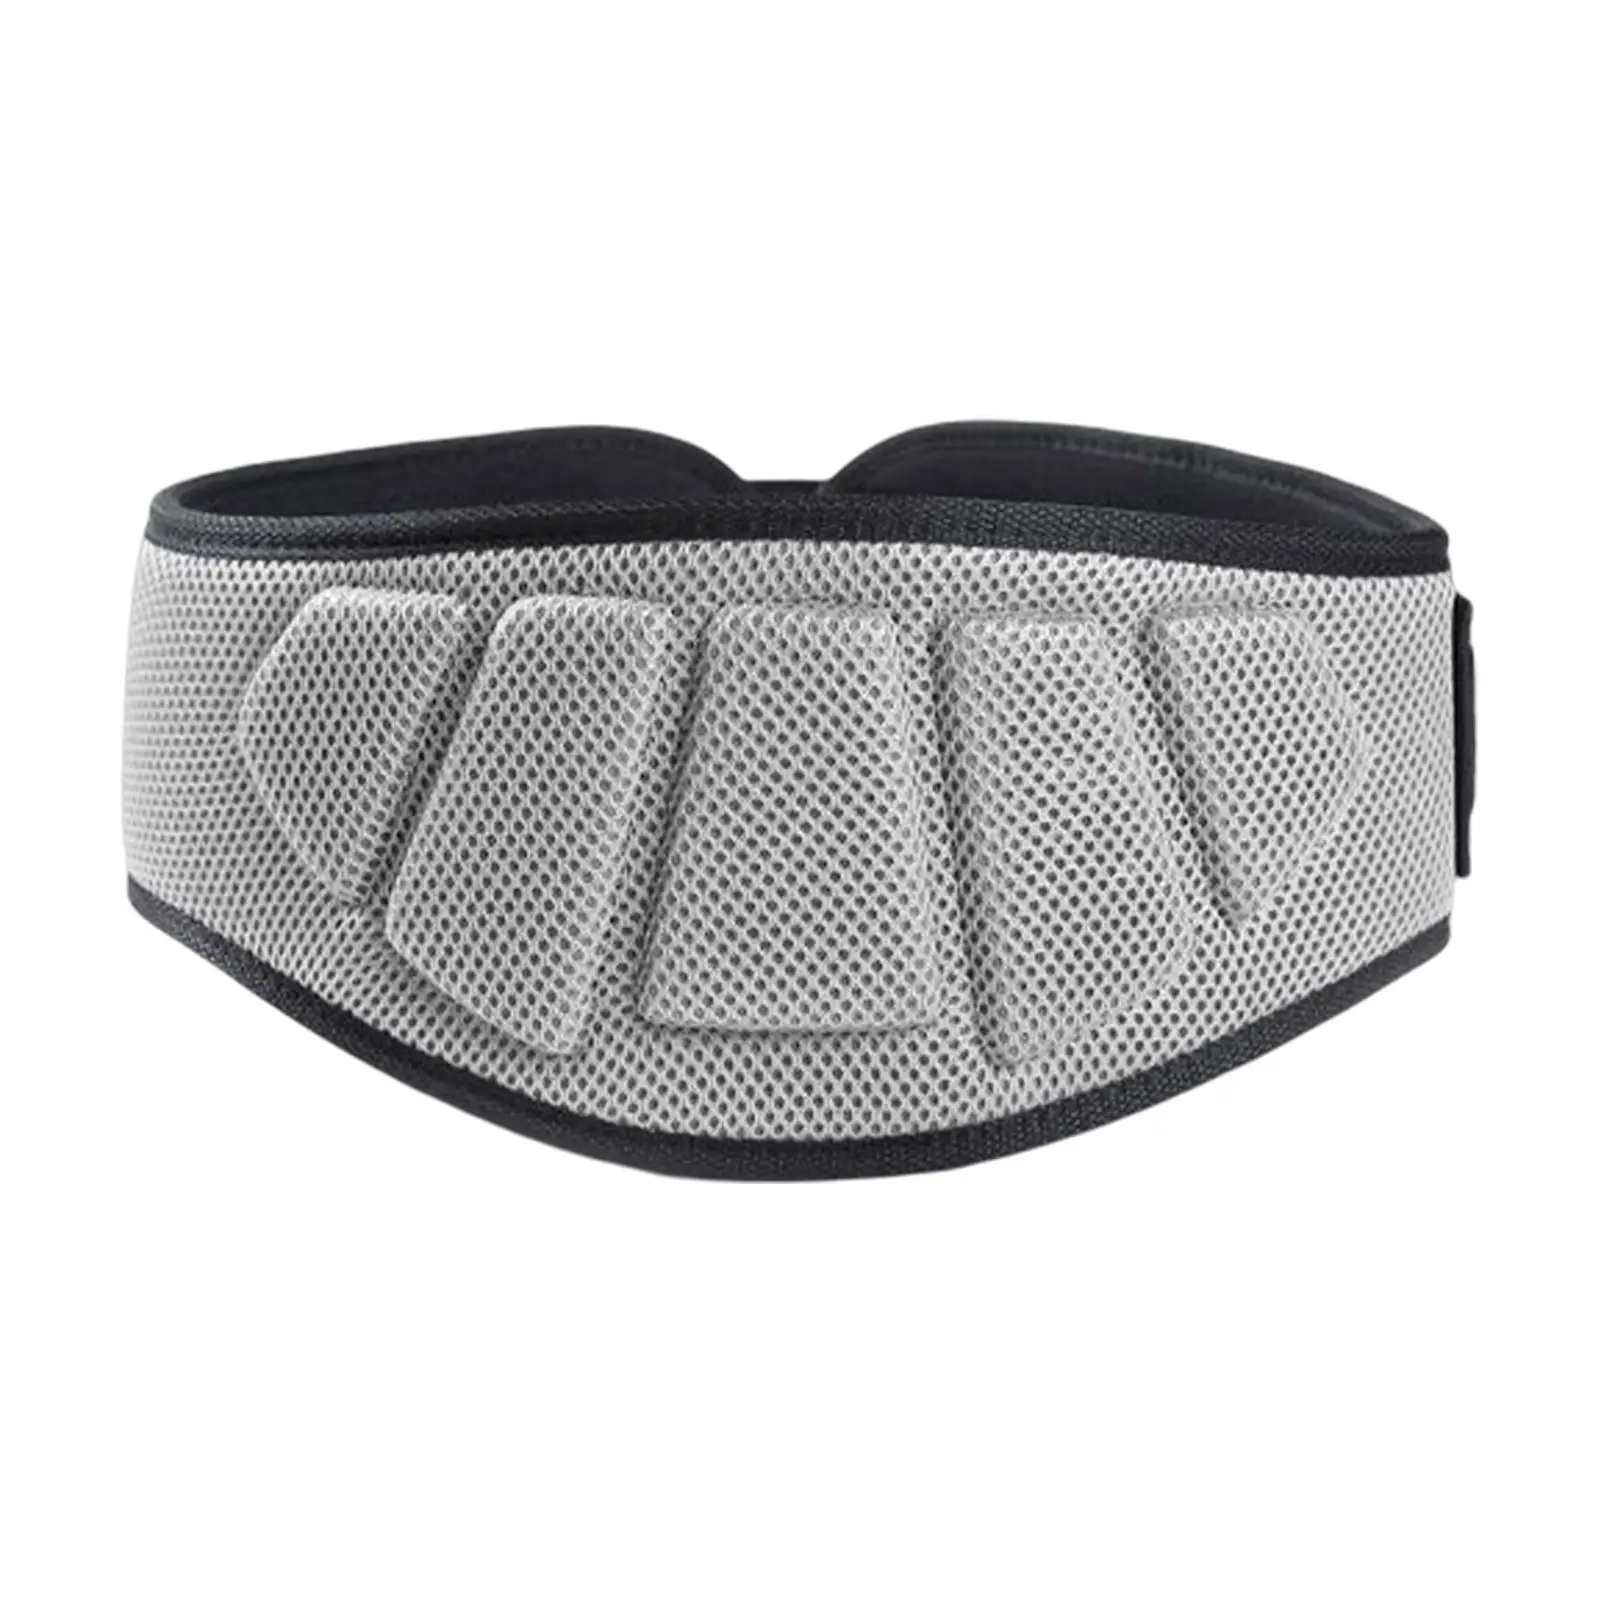 Breathable Weightlifting Belt for Back, Powerlifting, Workout Belt, Protective